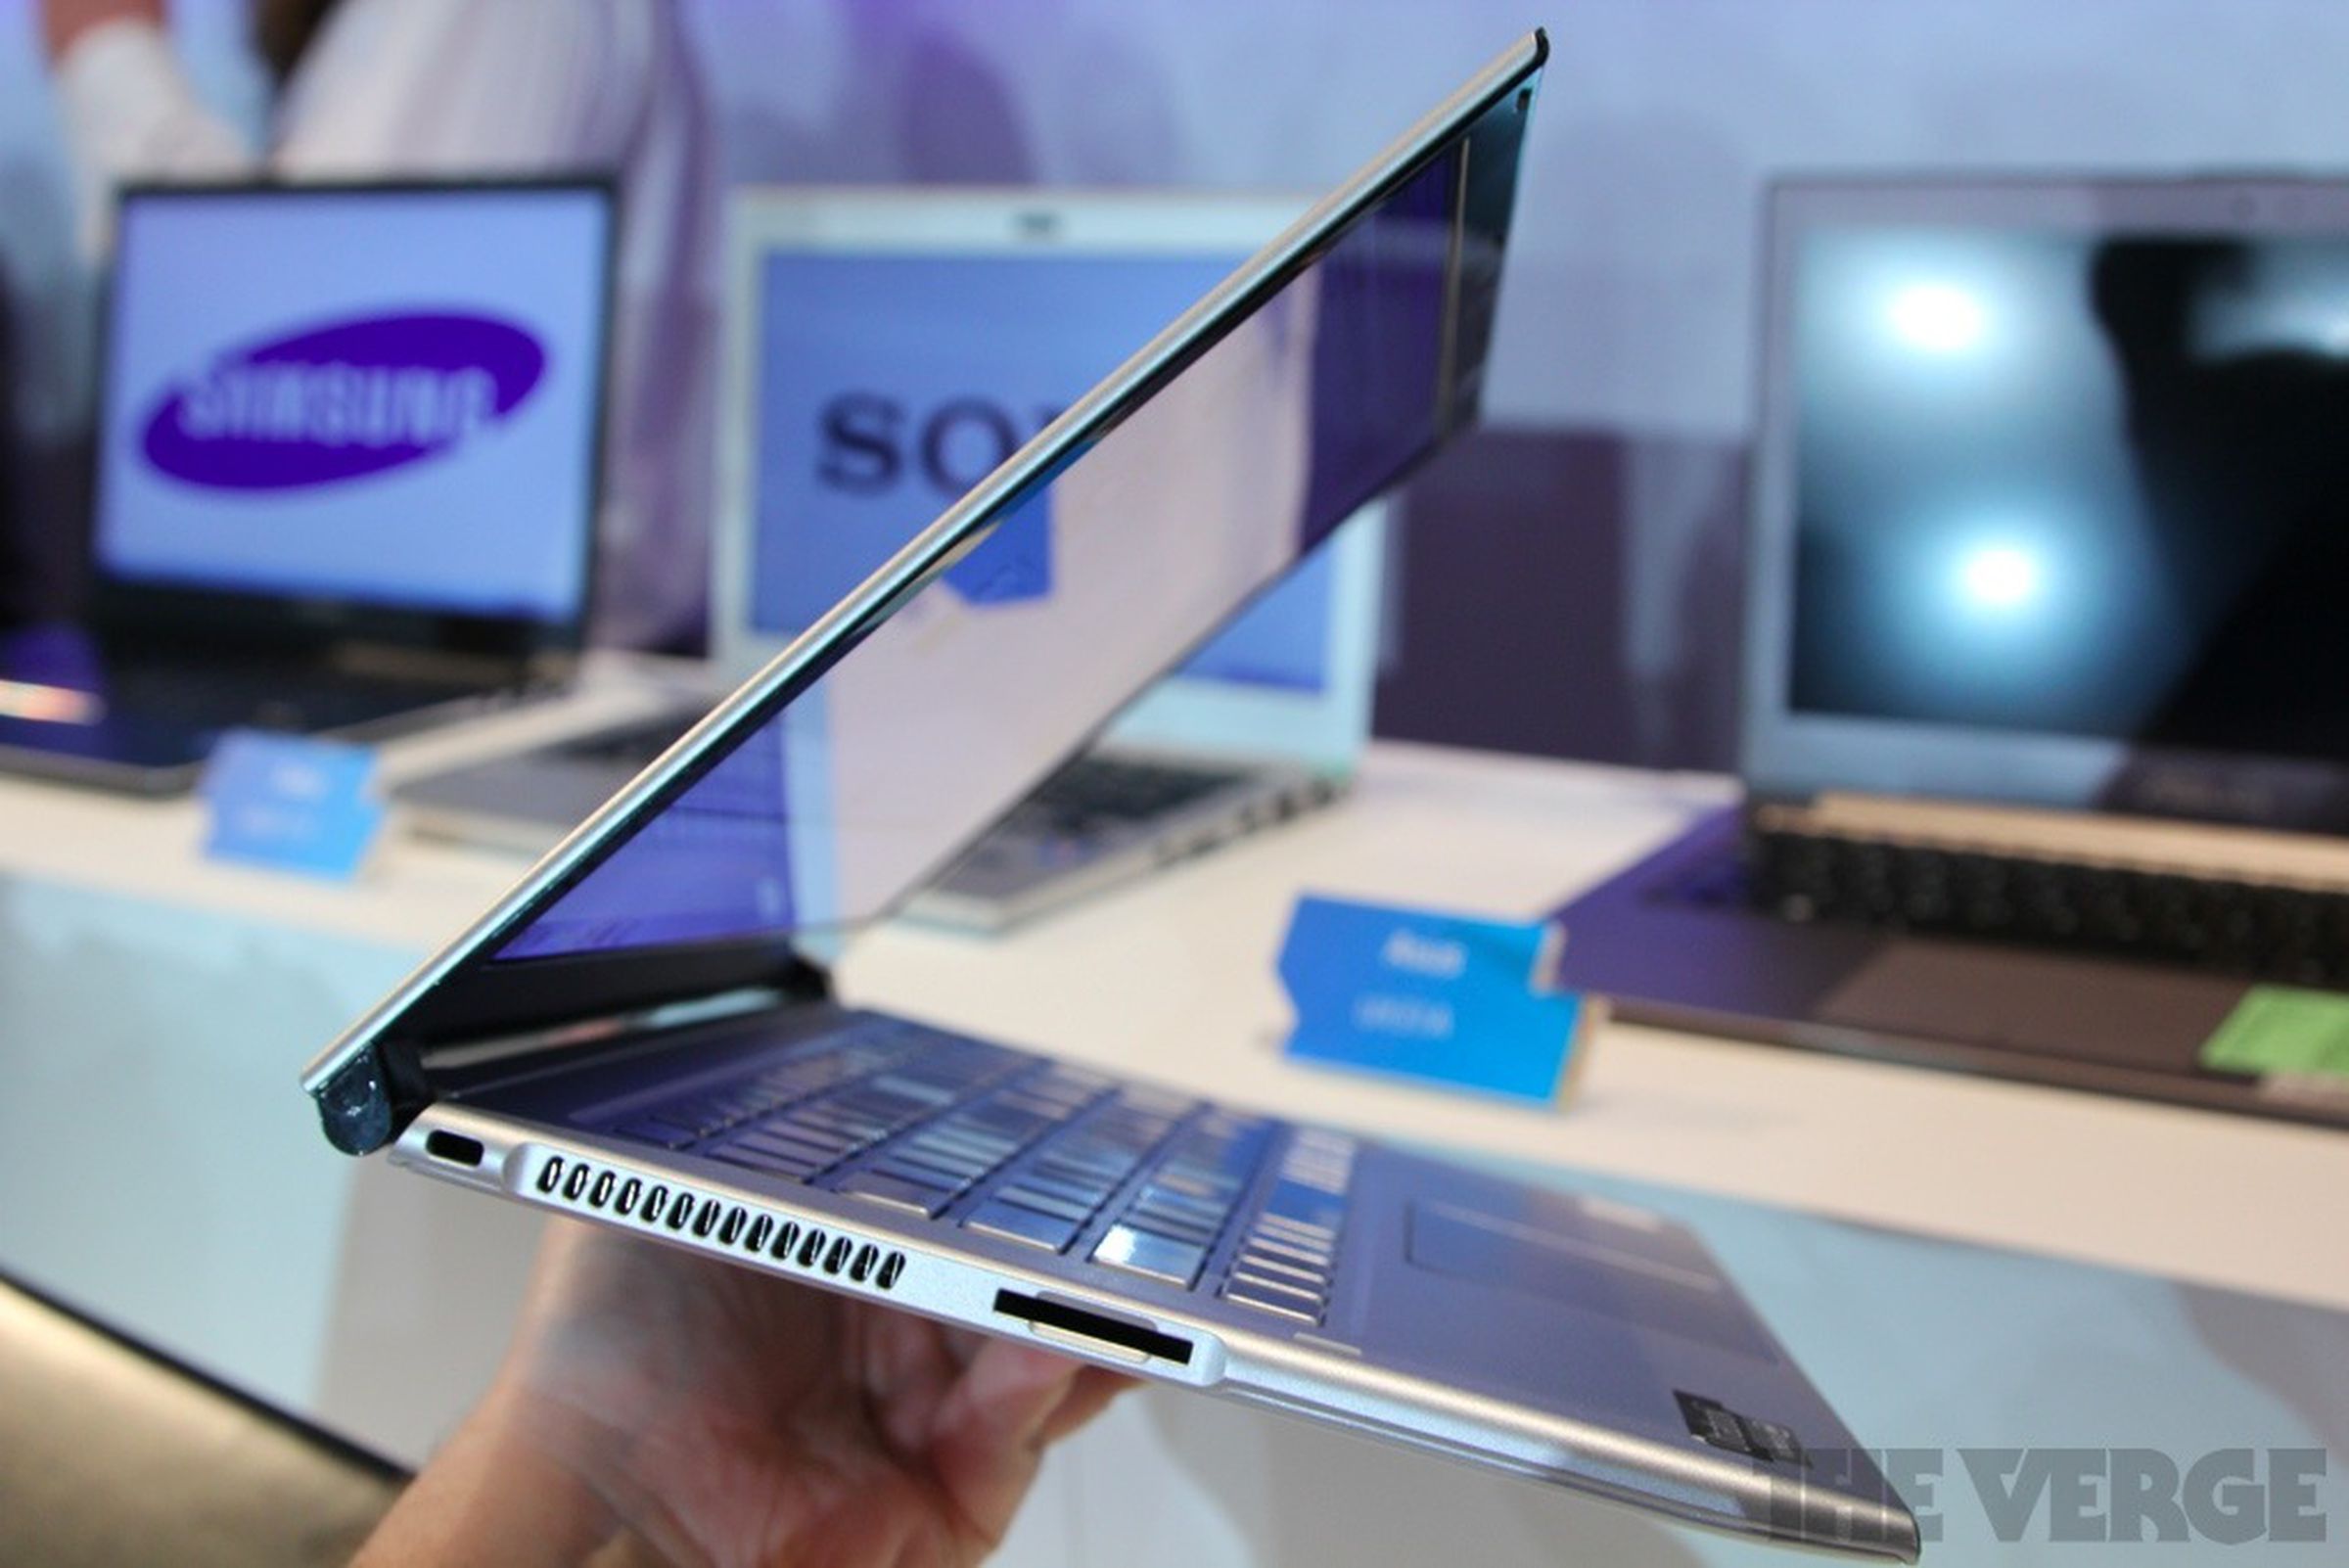 NEC LaVie Z ultrabook hands-on pictures